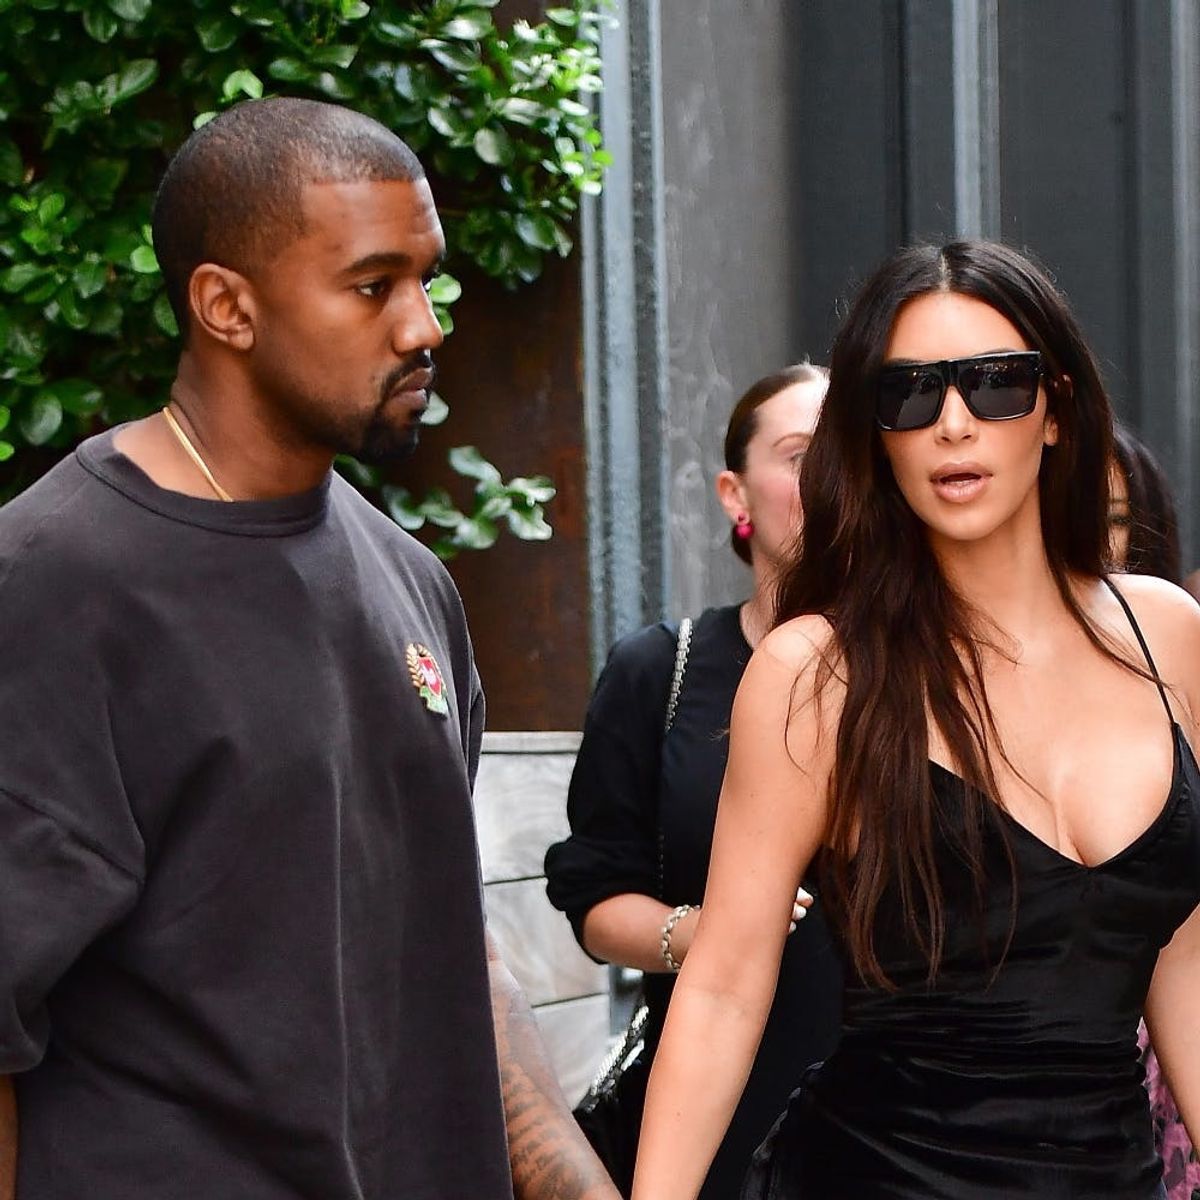 Kim Kardashian Steps Out Without Her Engagement Ring